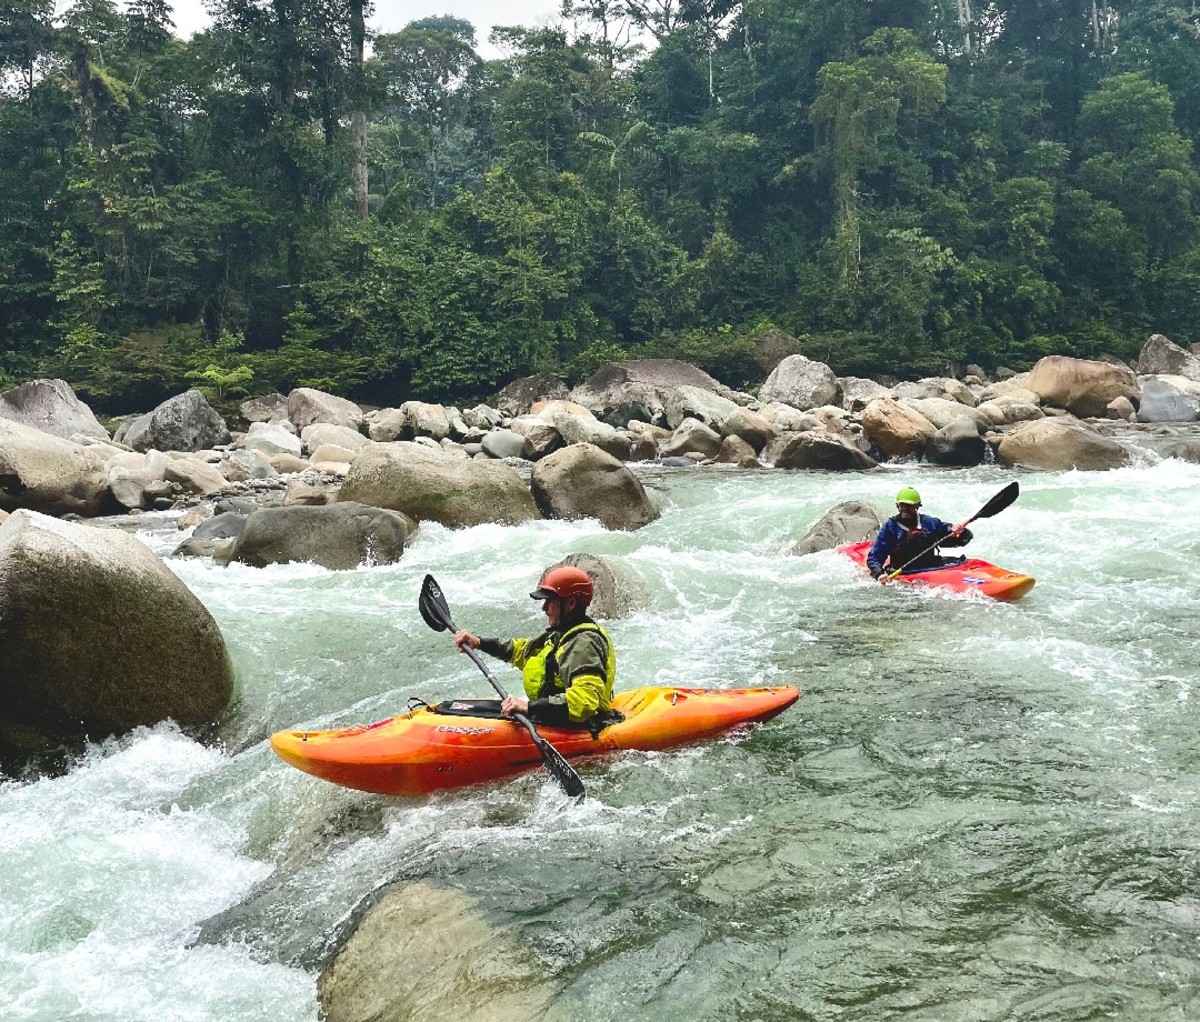 Two solo kayakers head down a drop of whitewater on a river in Ecuador